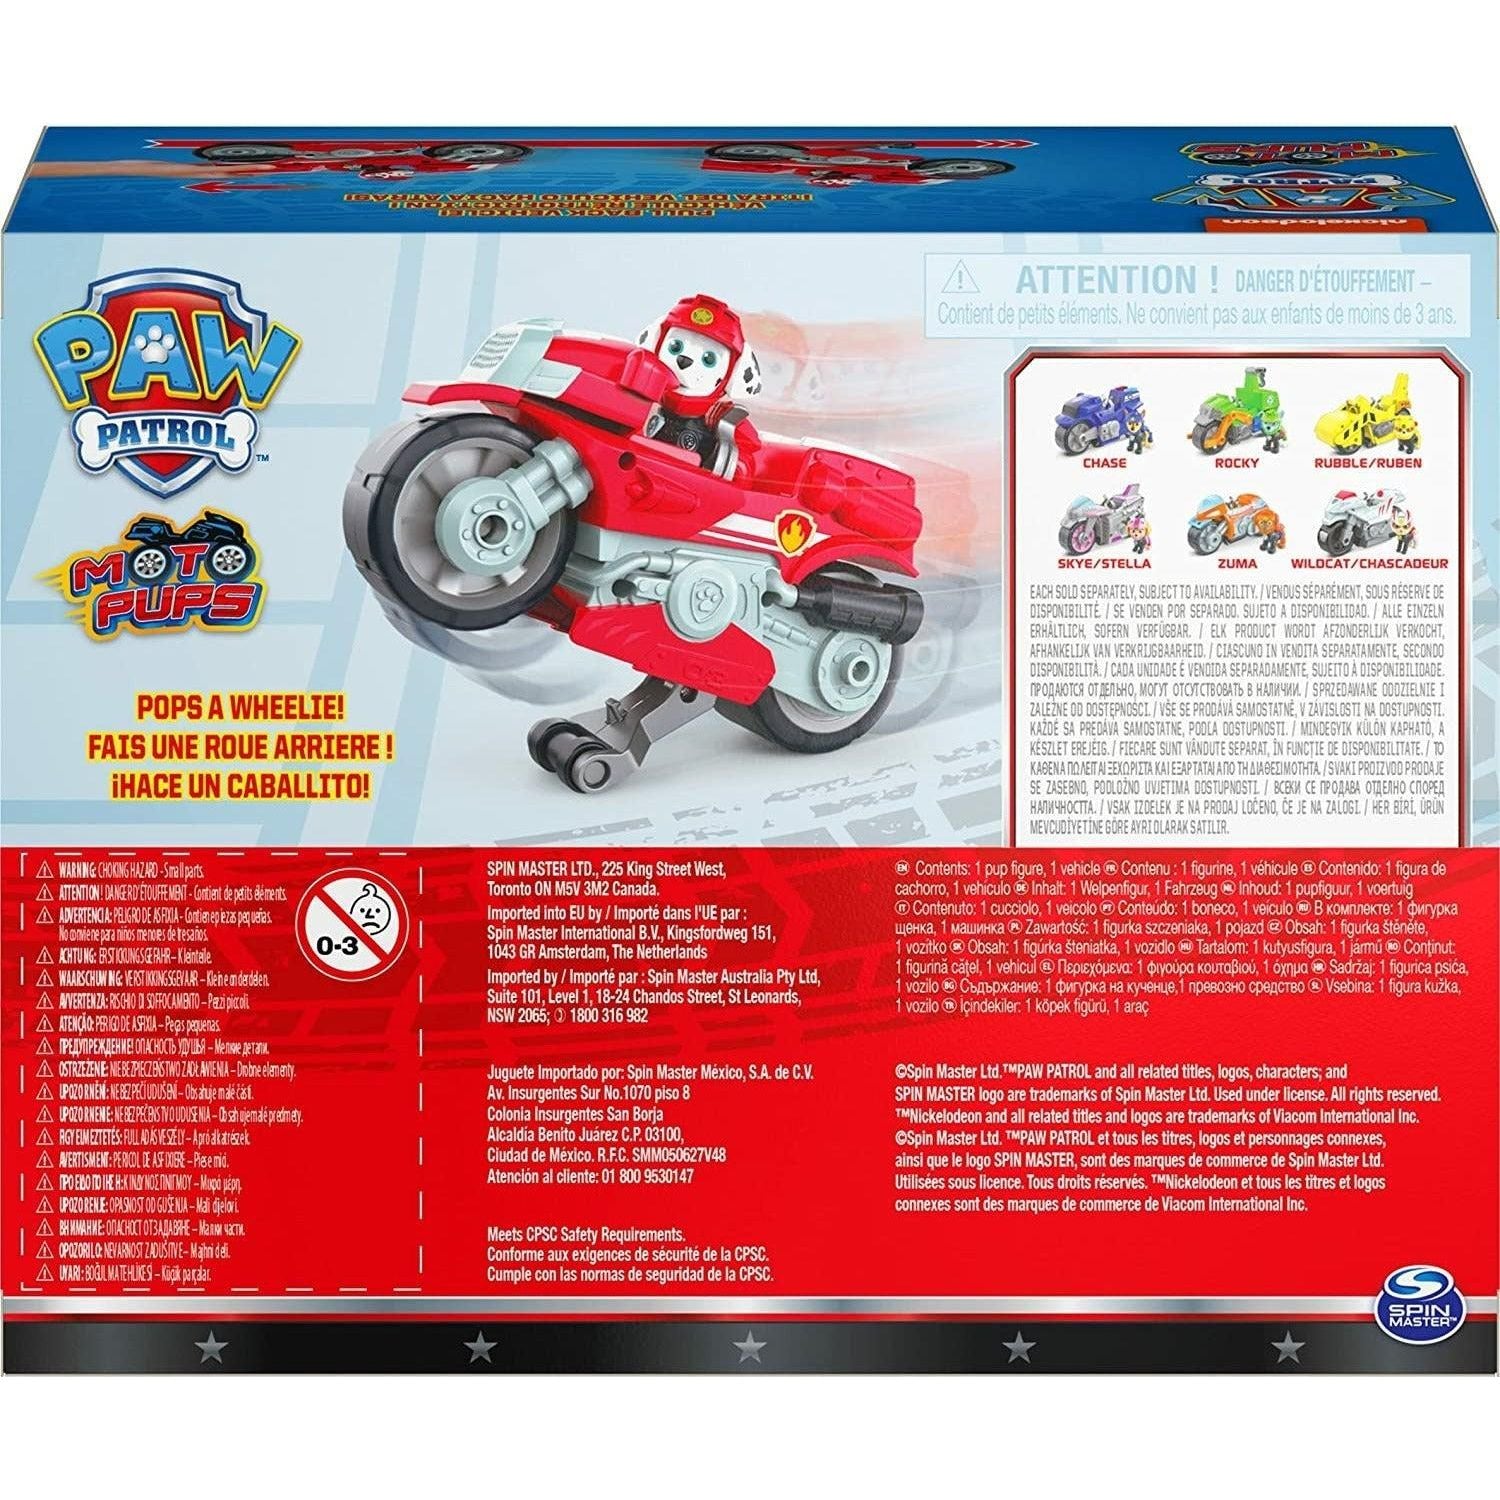 Paw Patrol, Moto Pups Marshall’s Deluxe Pull Back Motorcycle Vehicle with Wheelie Feature and Toy Figure - BumbleToys - 2-4 Years, 5-7 Years, Action Battling, Boys, OXE, Paw Patrol, Pre-Order